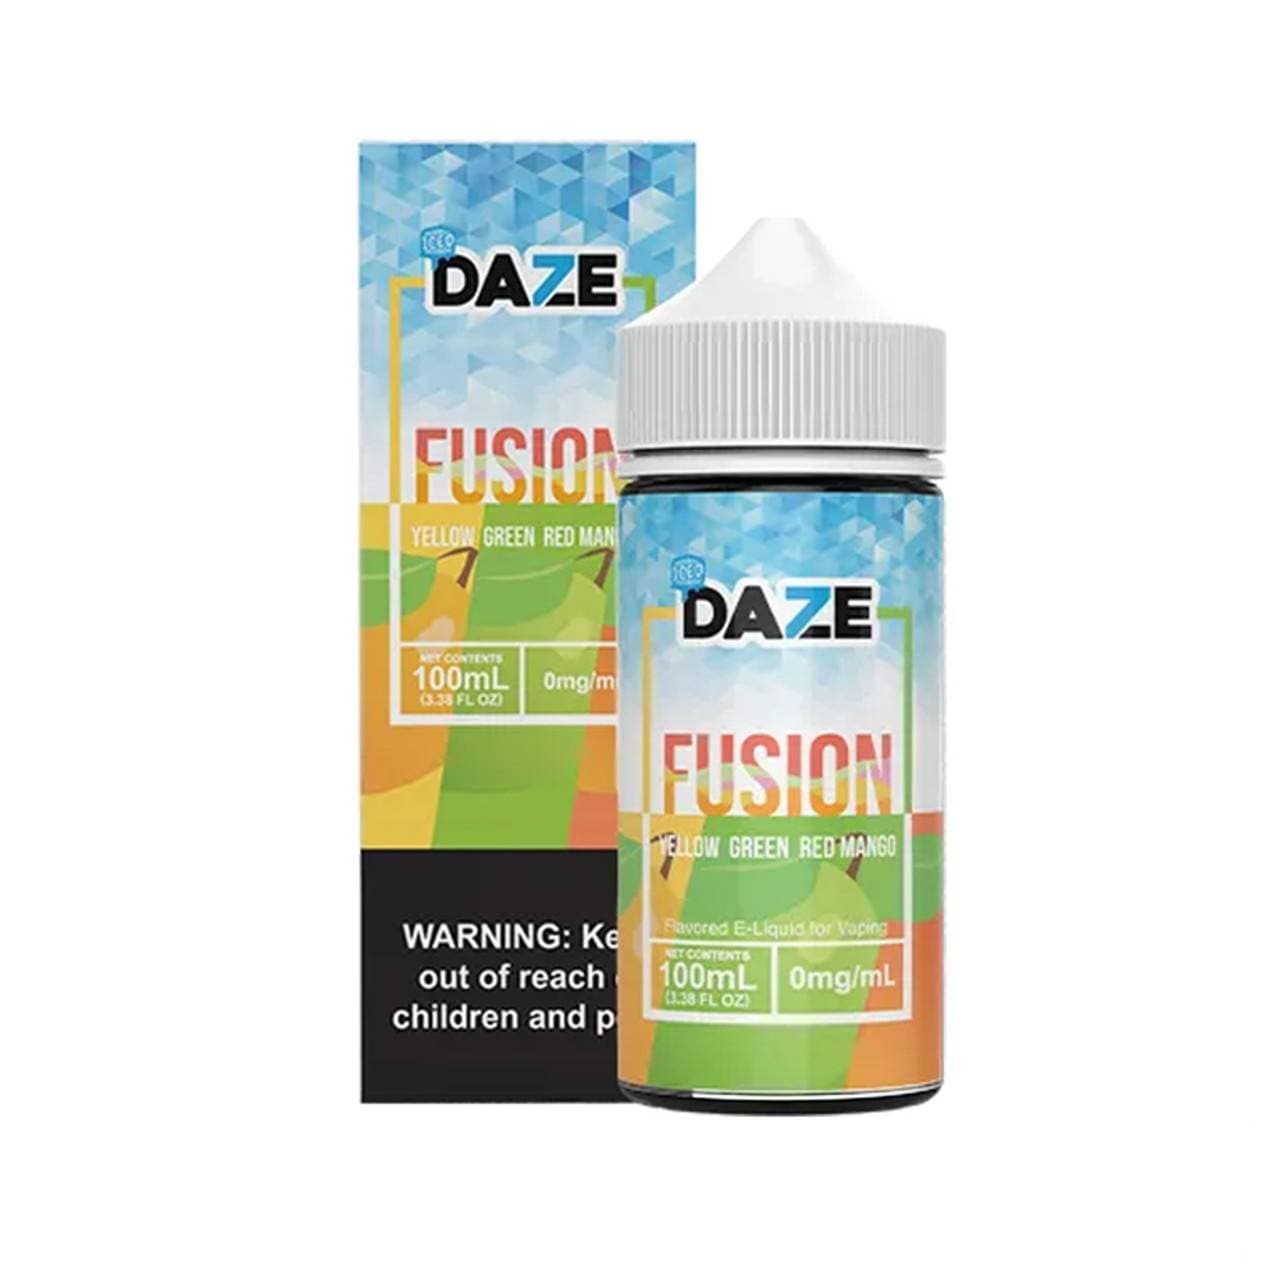 Iced Yellow Green Red Mango 7 Daze Fusion 100 ml At Best Price In Pakistan